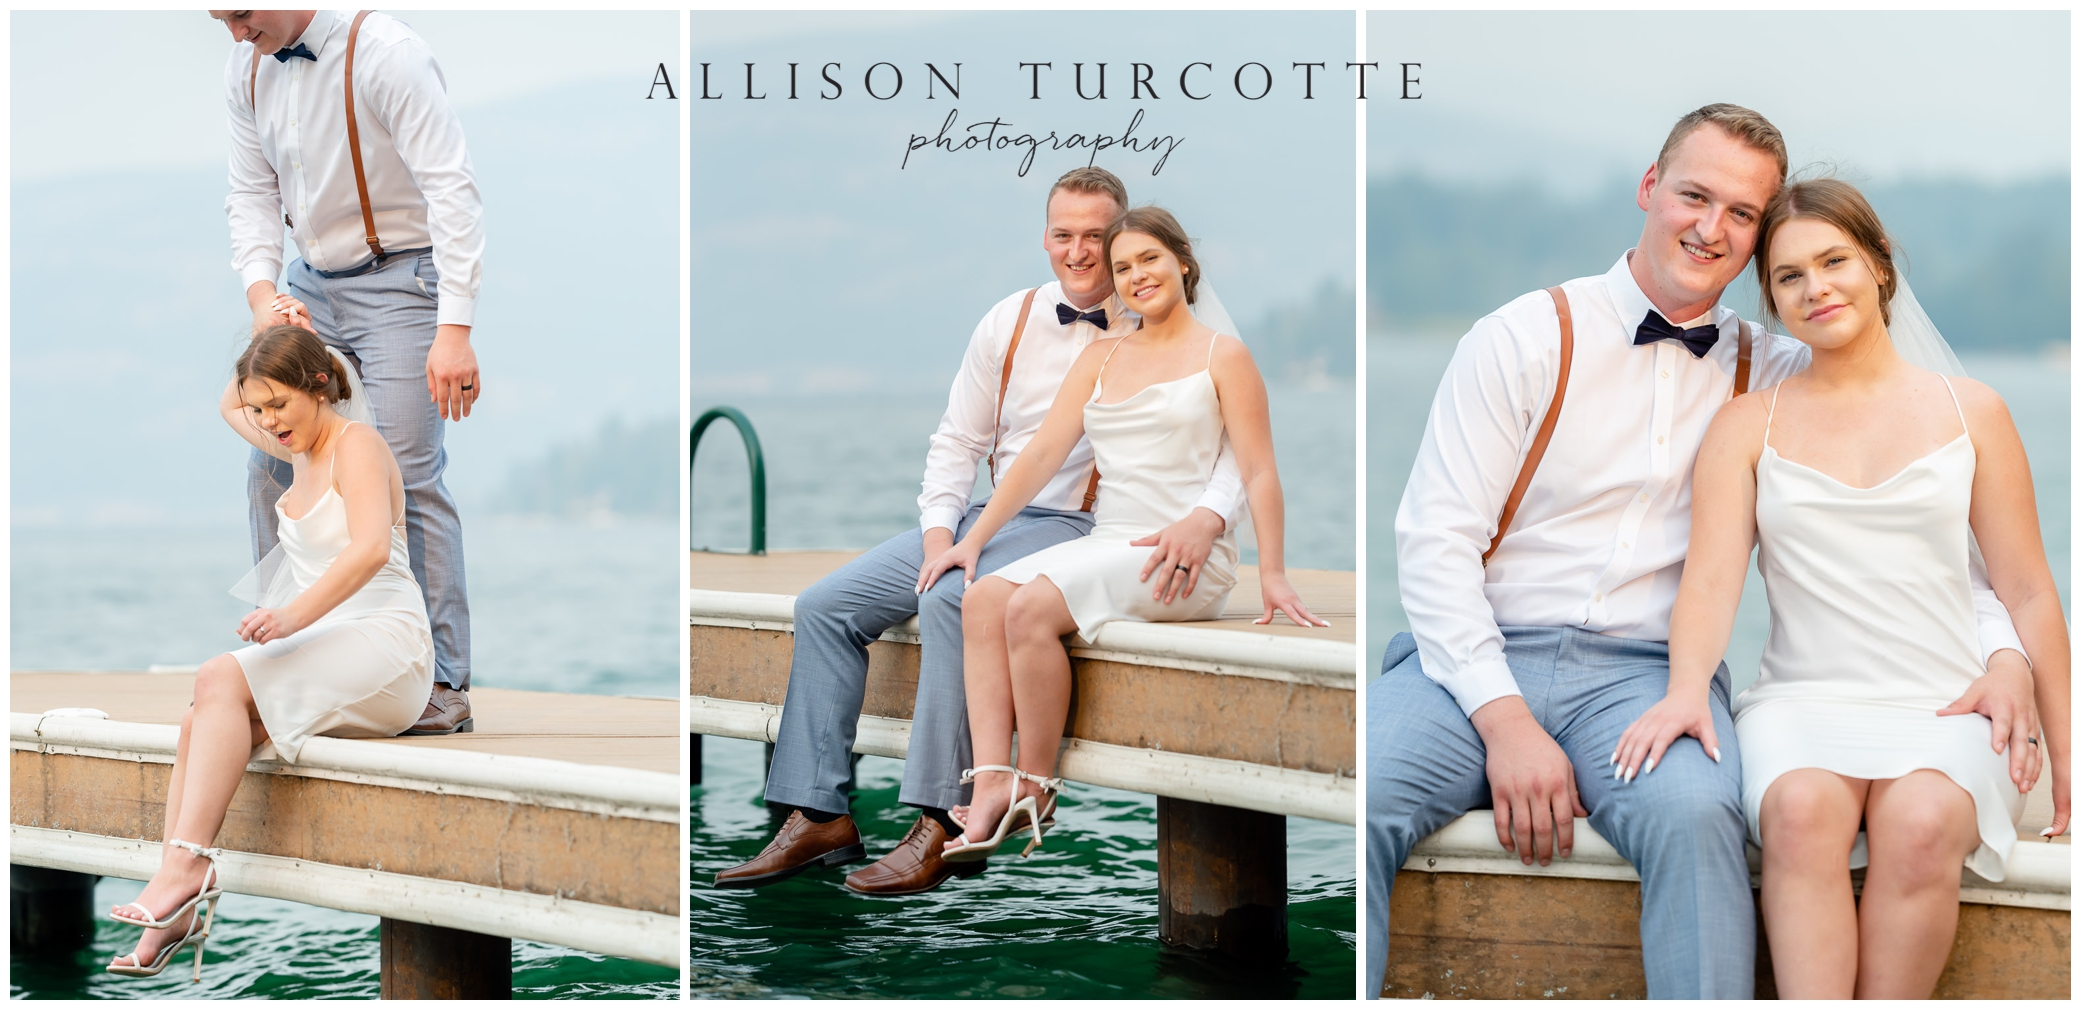 Sitting on the dock on Lake Pend Oreille after wedding ceremony